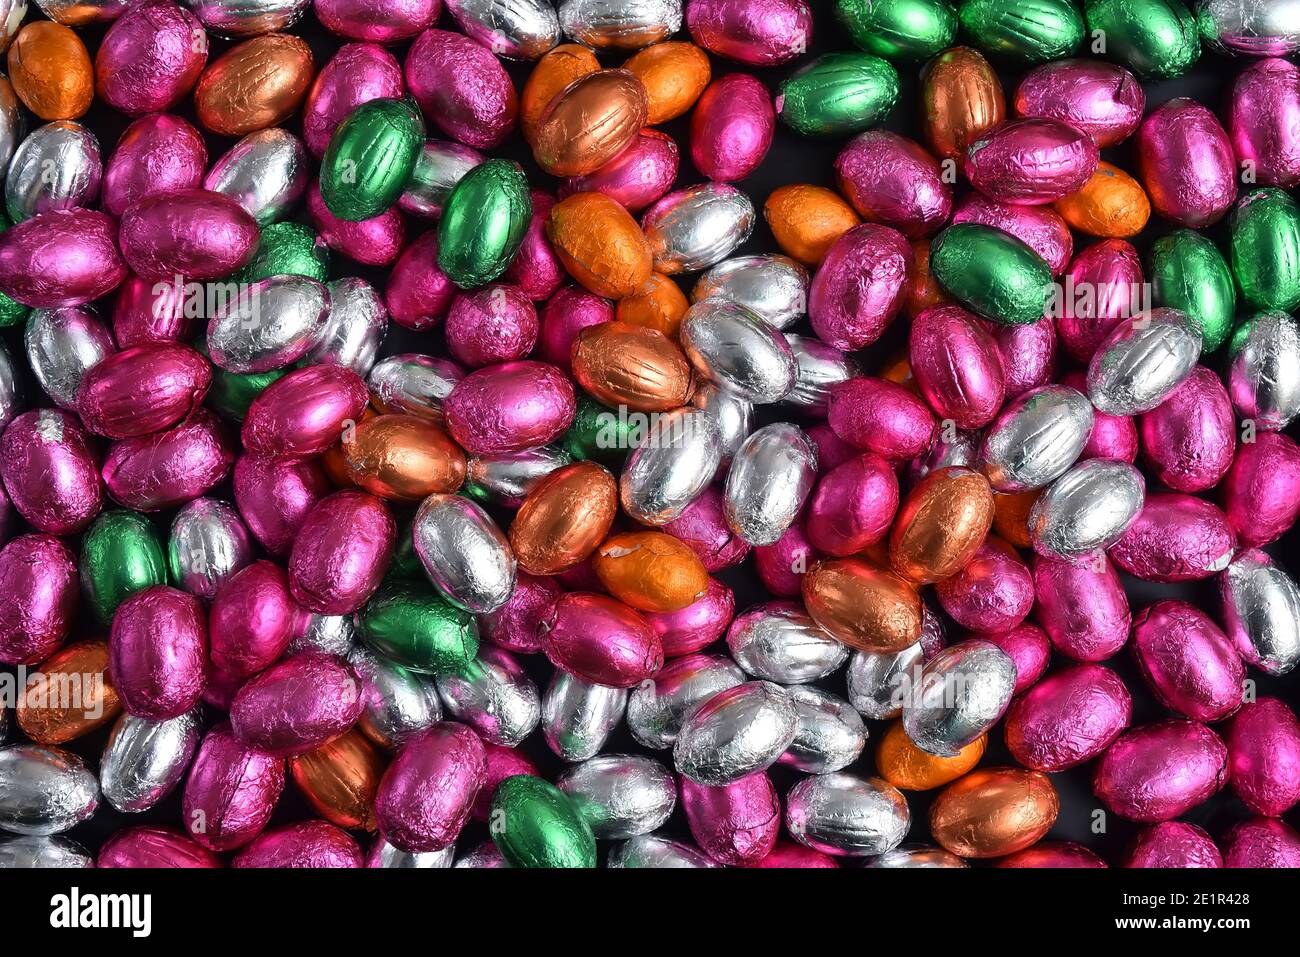 Pink, green, orange, silver and bronze foil wrapped chocolate easter eggs, against a black background. Stock Photo